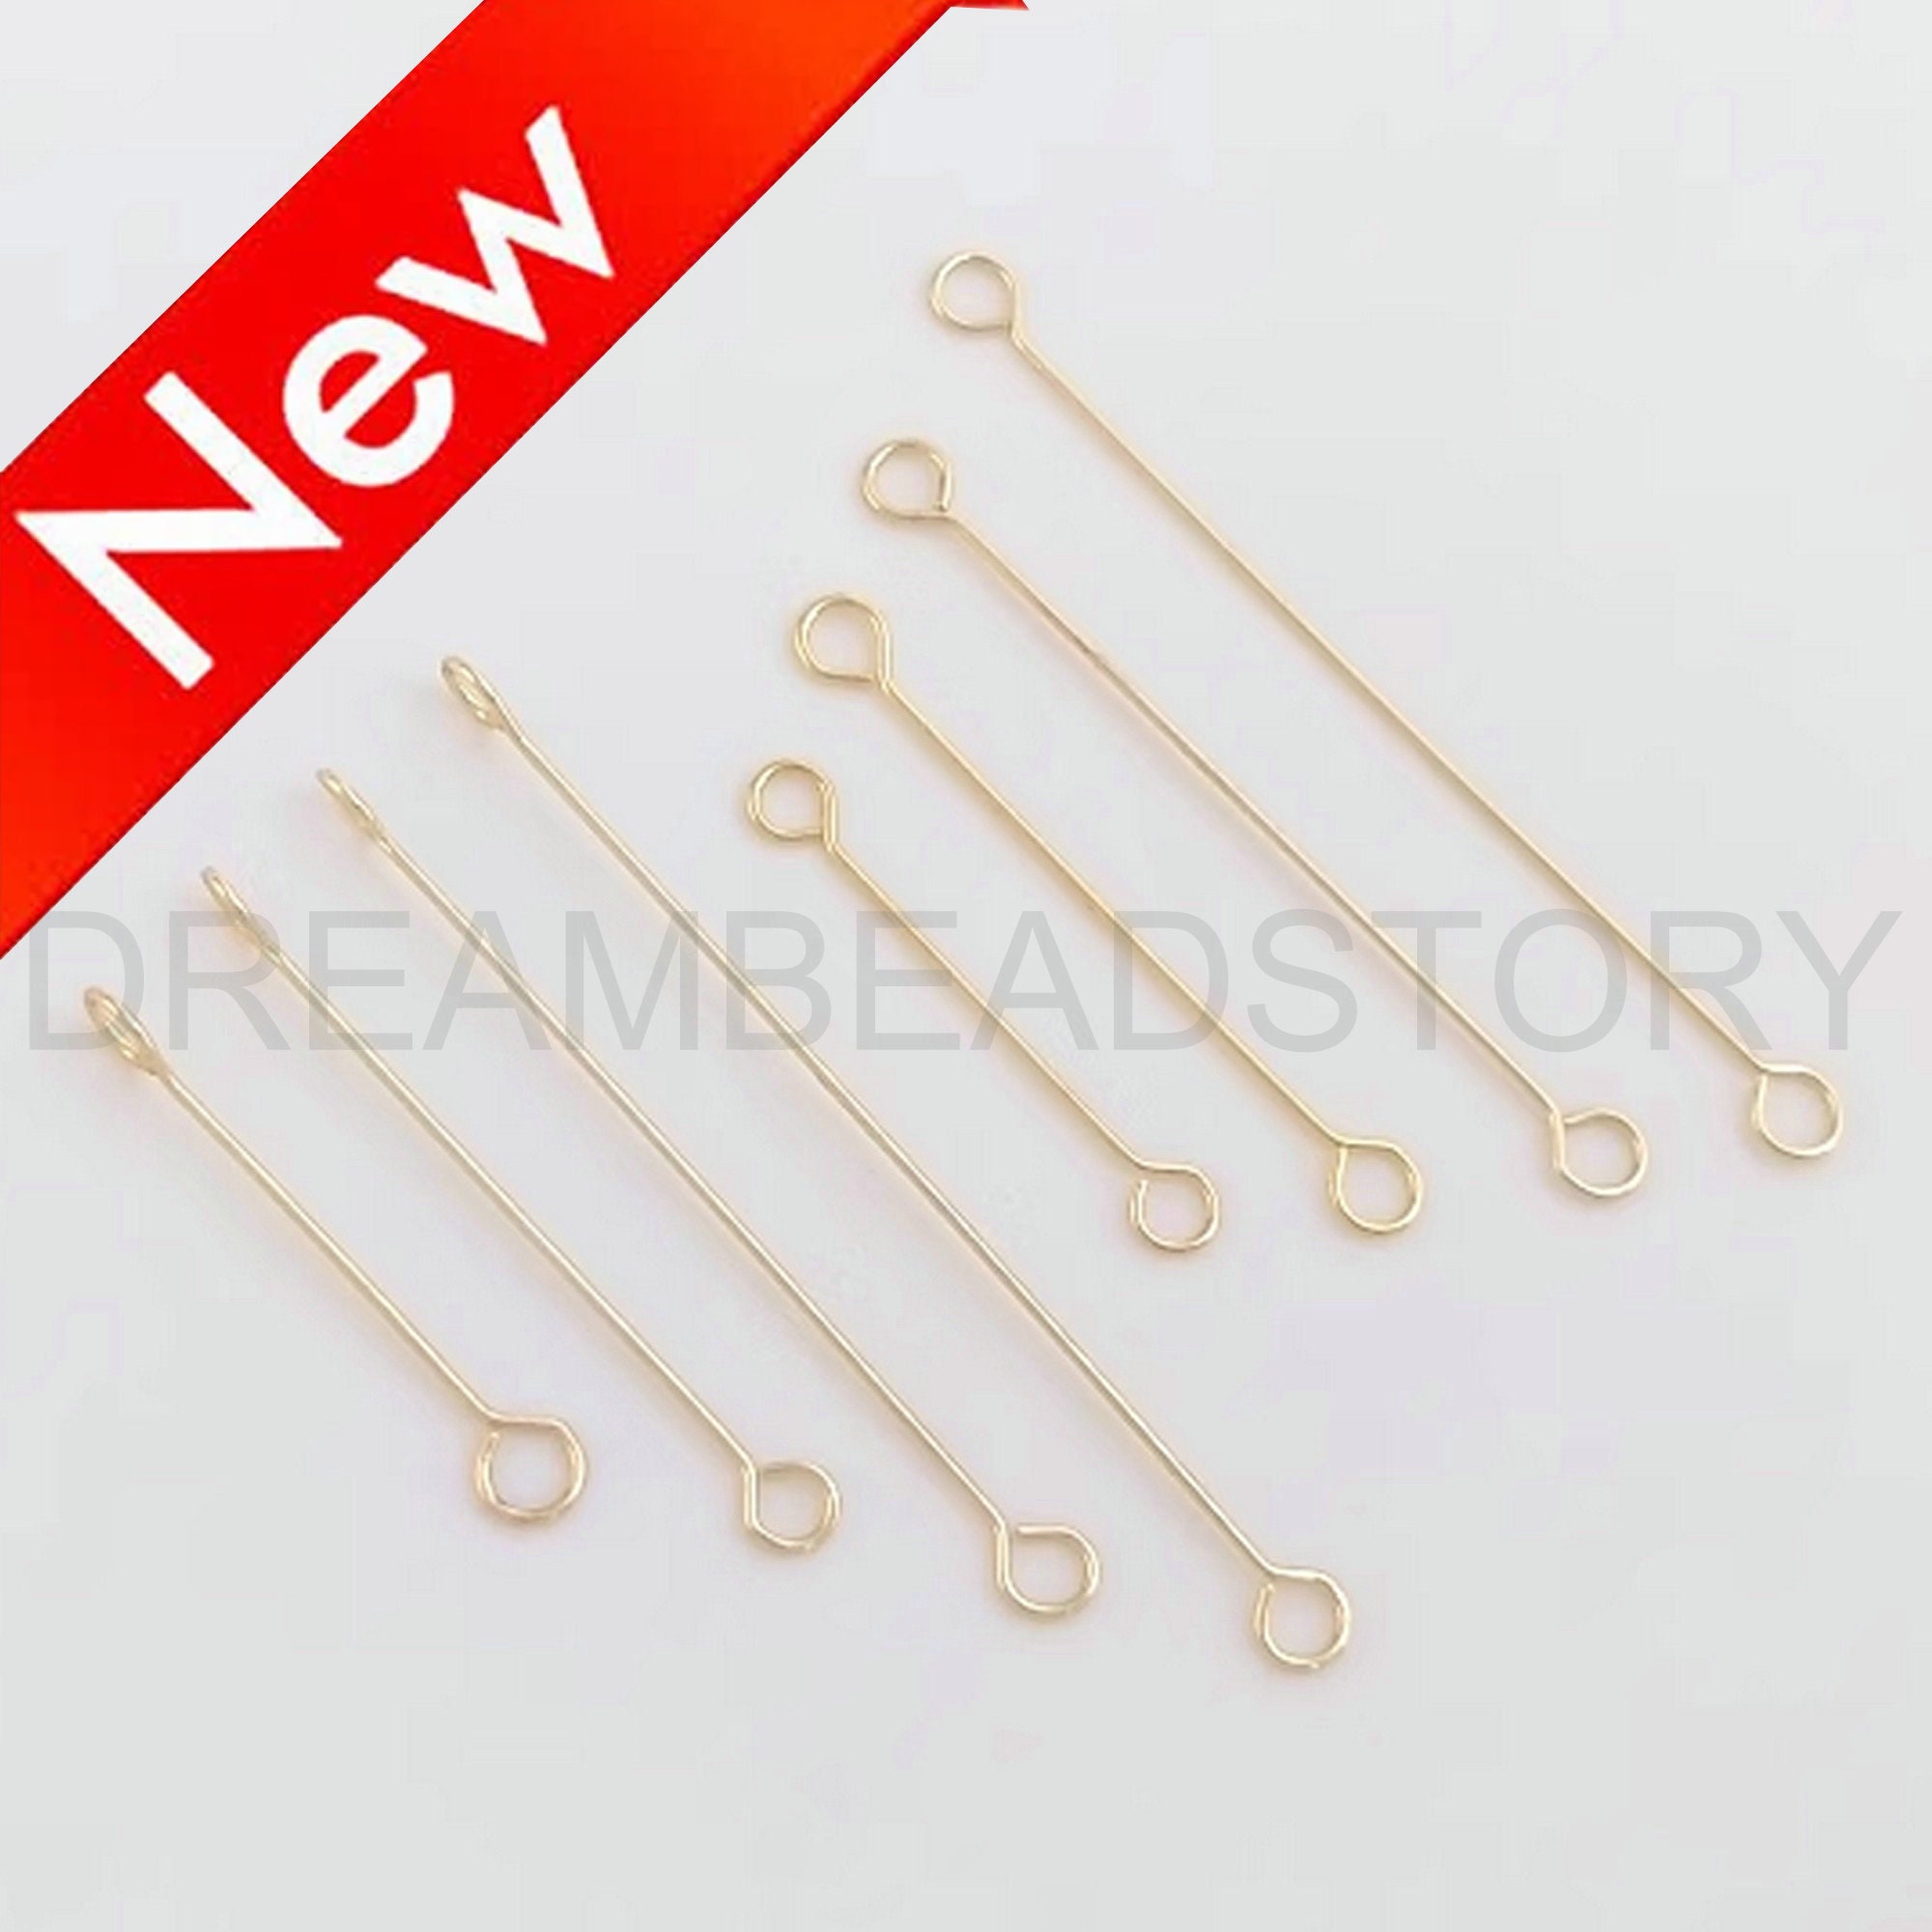 50pcs/lot 15 20 25 30 45mm Metal Stainless Steel Steel Double Eye Pin  Earrings Ear Connecting Rod for DIY Jewelry Pins Making Handcraft Supplies